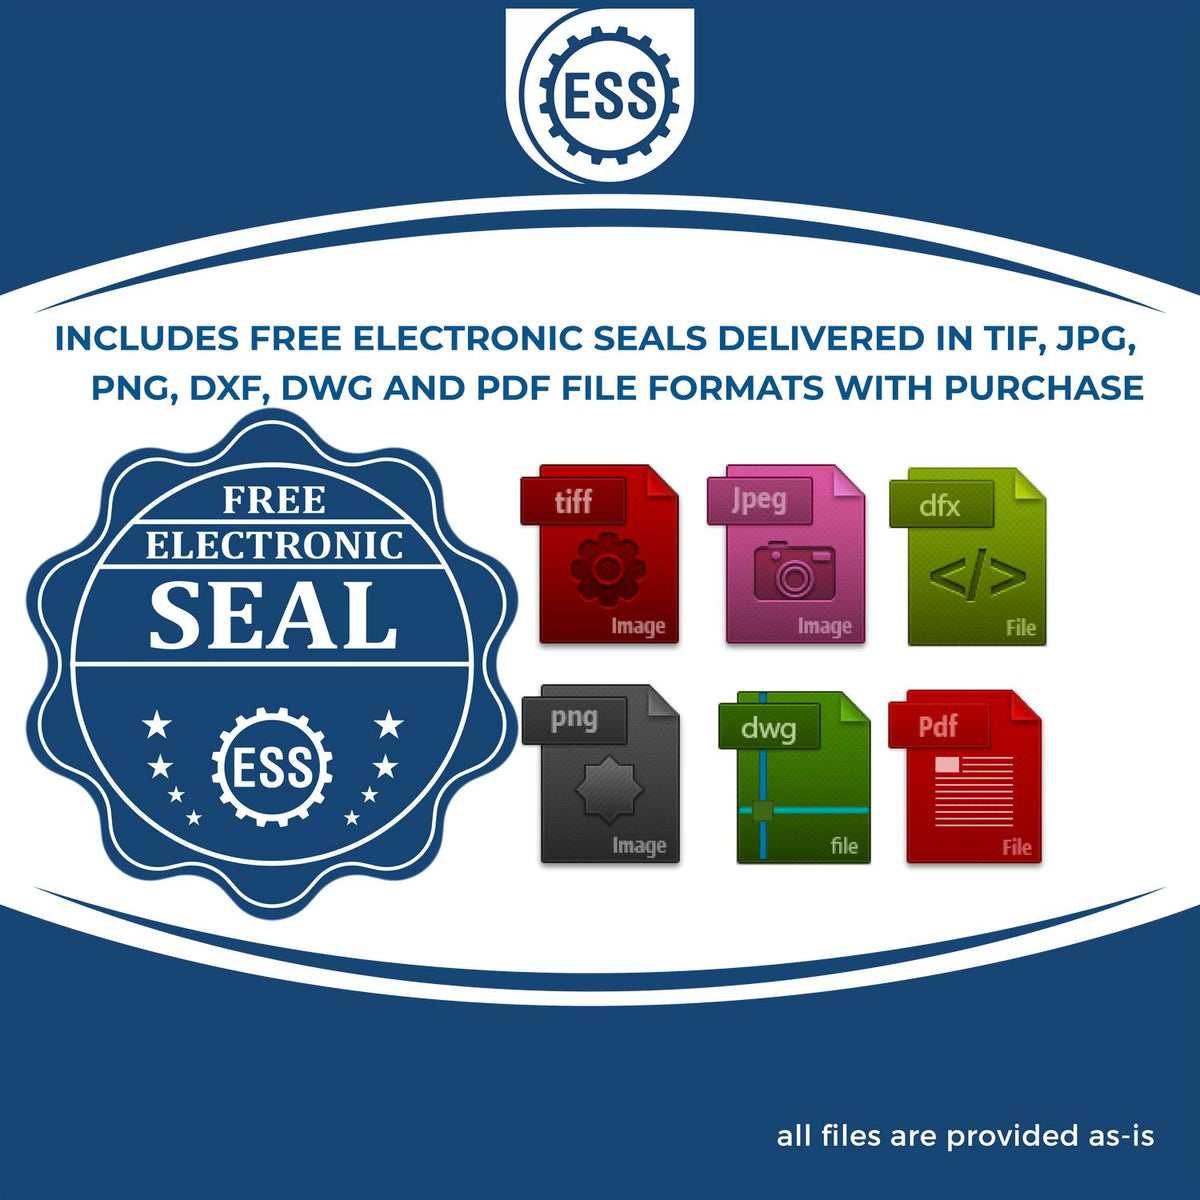 An infographic for the free electronic seal for the Gift Texas Engineer Seal illustrating the different file type icons such as DXF, DWG, TIF, JPG and PNG.